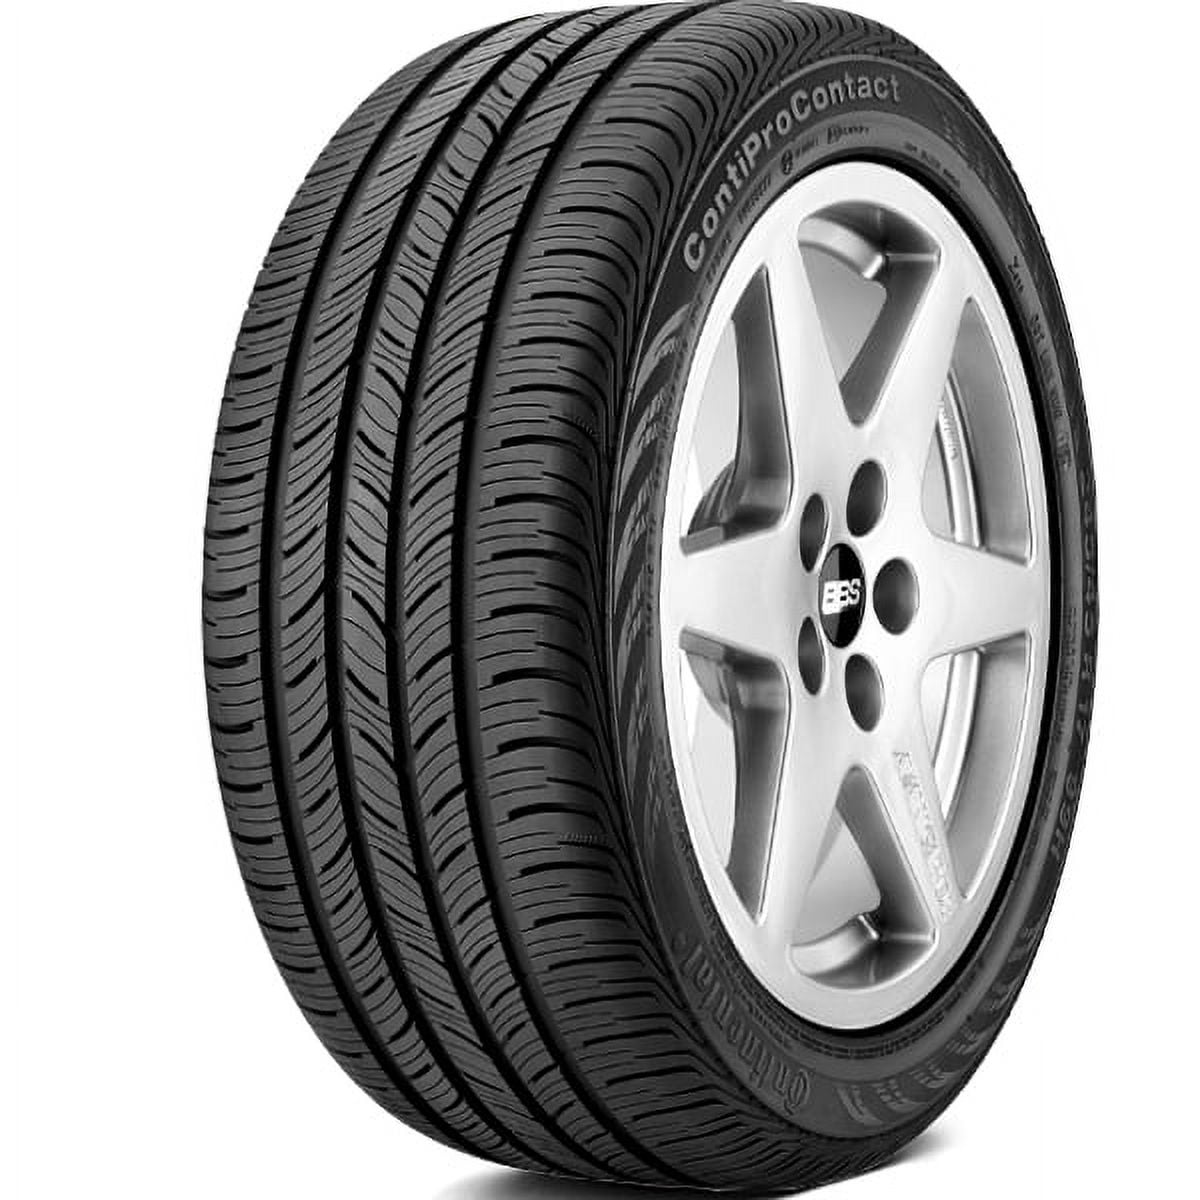 ContiProContact Tire BSW Continental 82H 185/55R15